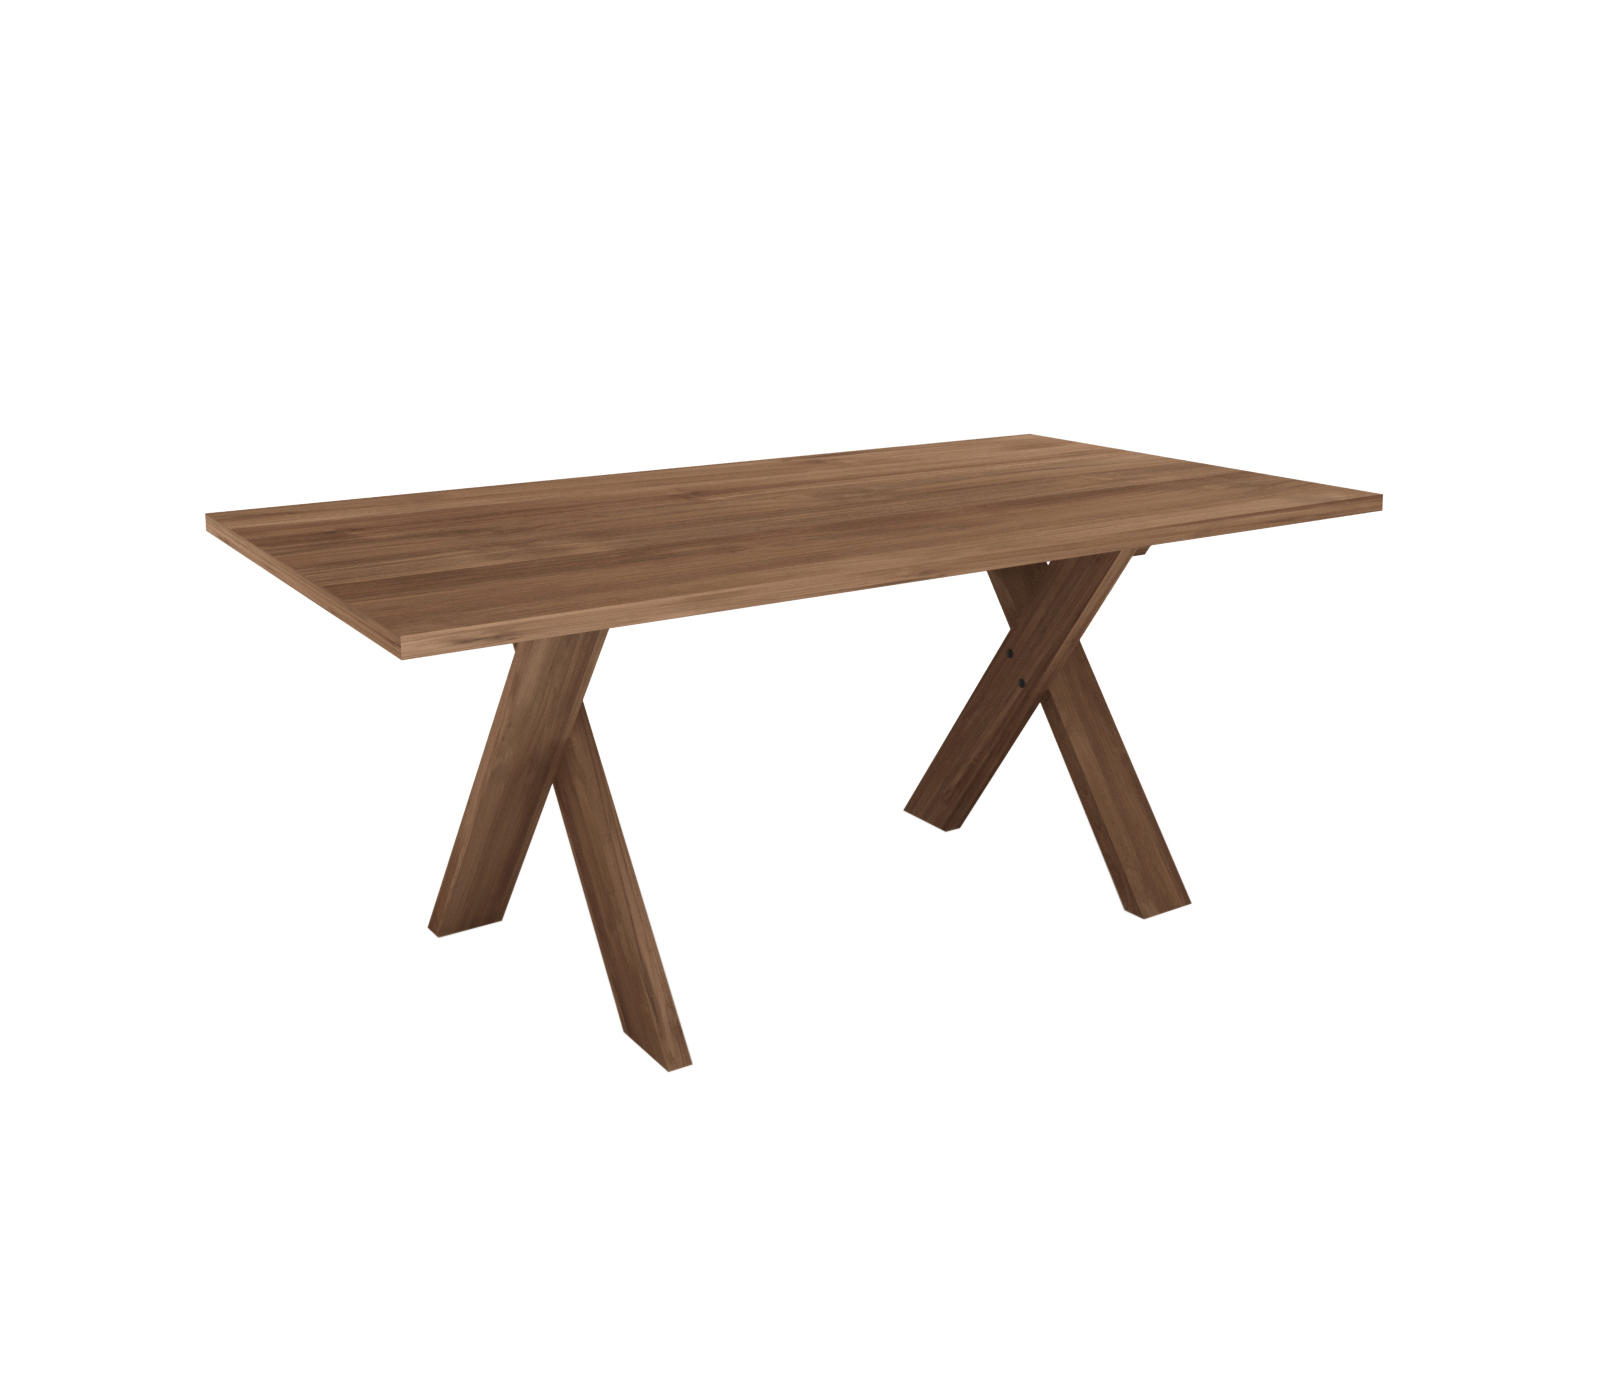 Teak Pettersson dining table | Architonic